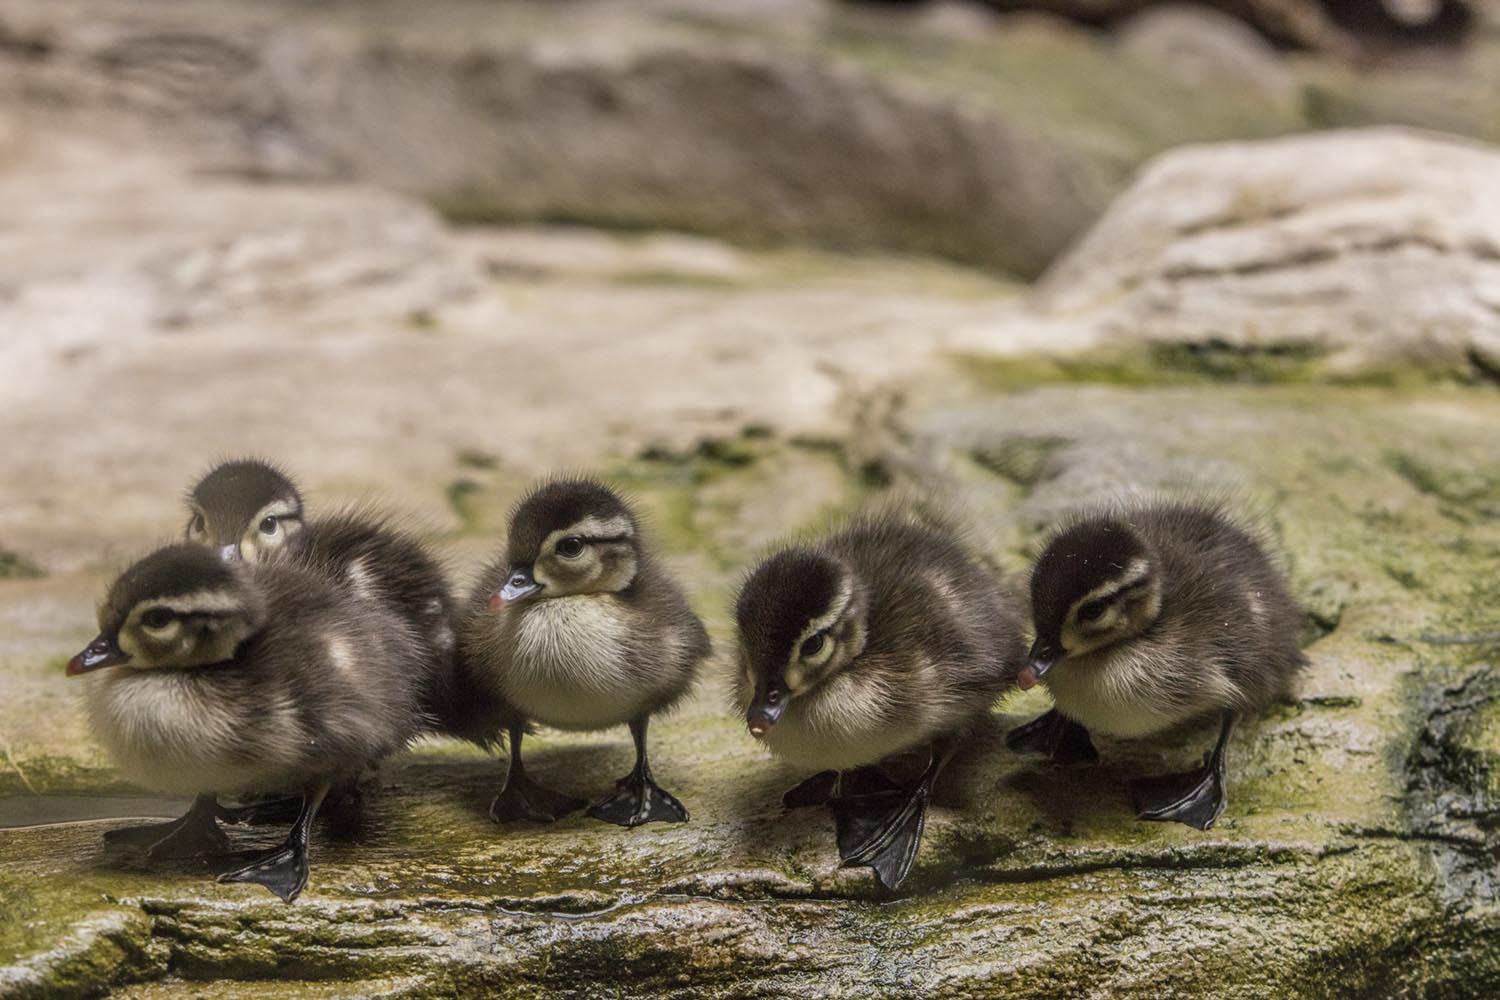 Six wood ducklings and their mother are now living in the Shedd Aquarium’s “At Home on the Great Lakes” exhibit. (Brenna Hernandez / ©Shedd Aquarium)